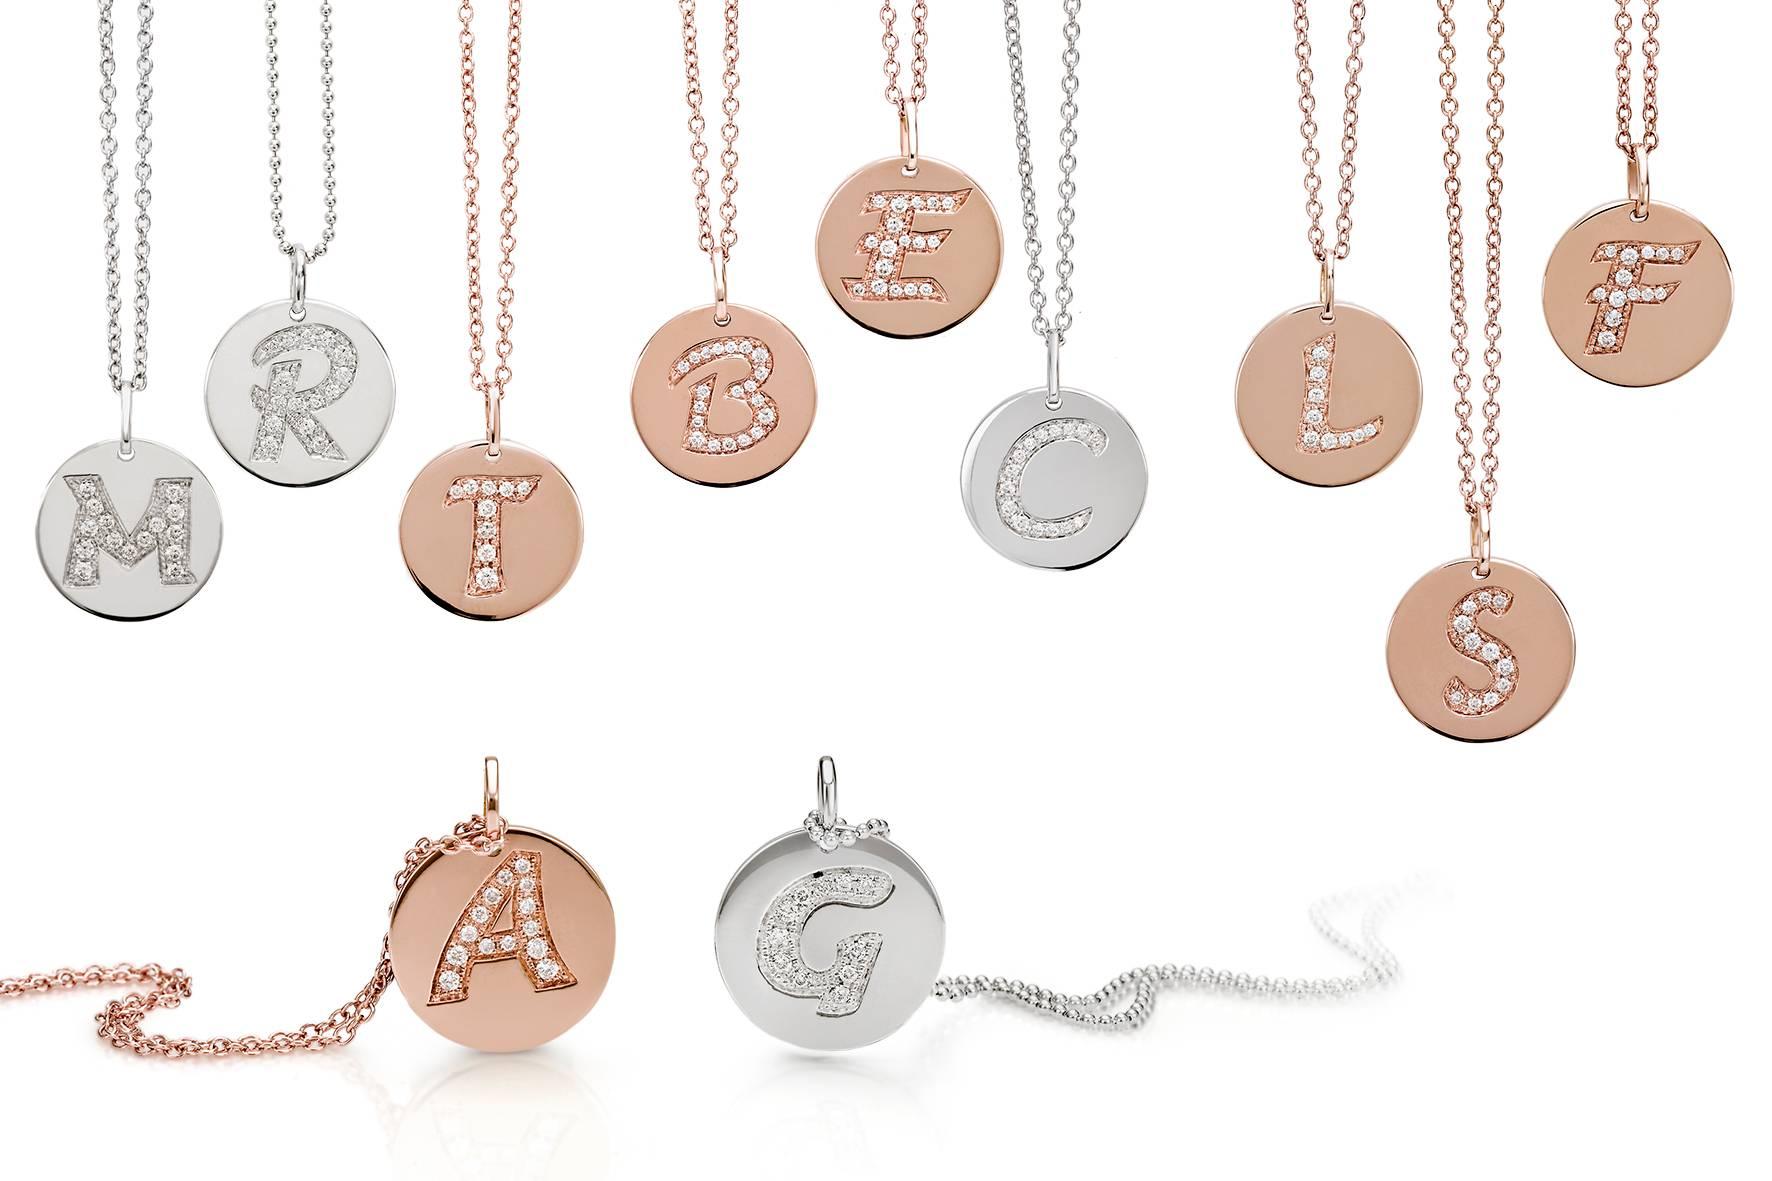 ASSYA London 's initial pendant is handcrafted from smooth 18kt yellow Gold and set with sparkling White Diamond on a fine chain. Make this personalized necklace your new style signature or give it as a unique gift. Choose the initial of your